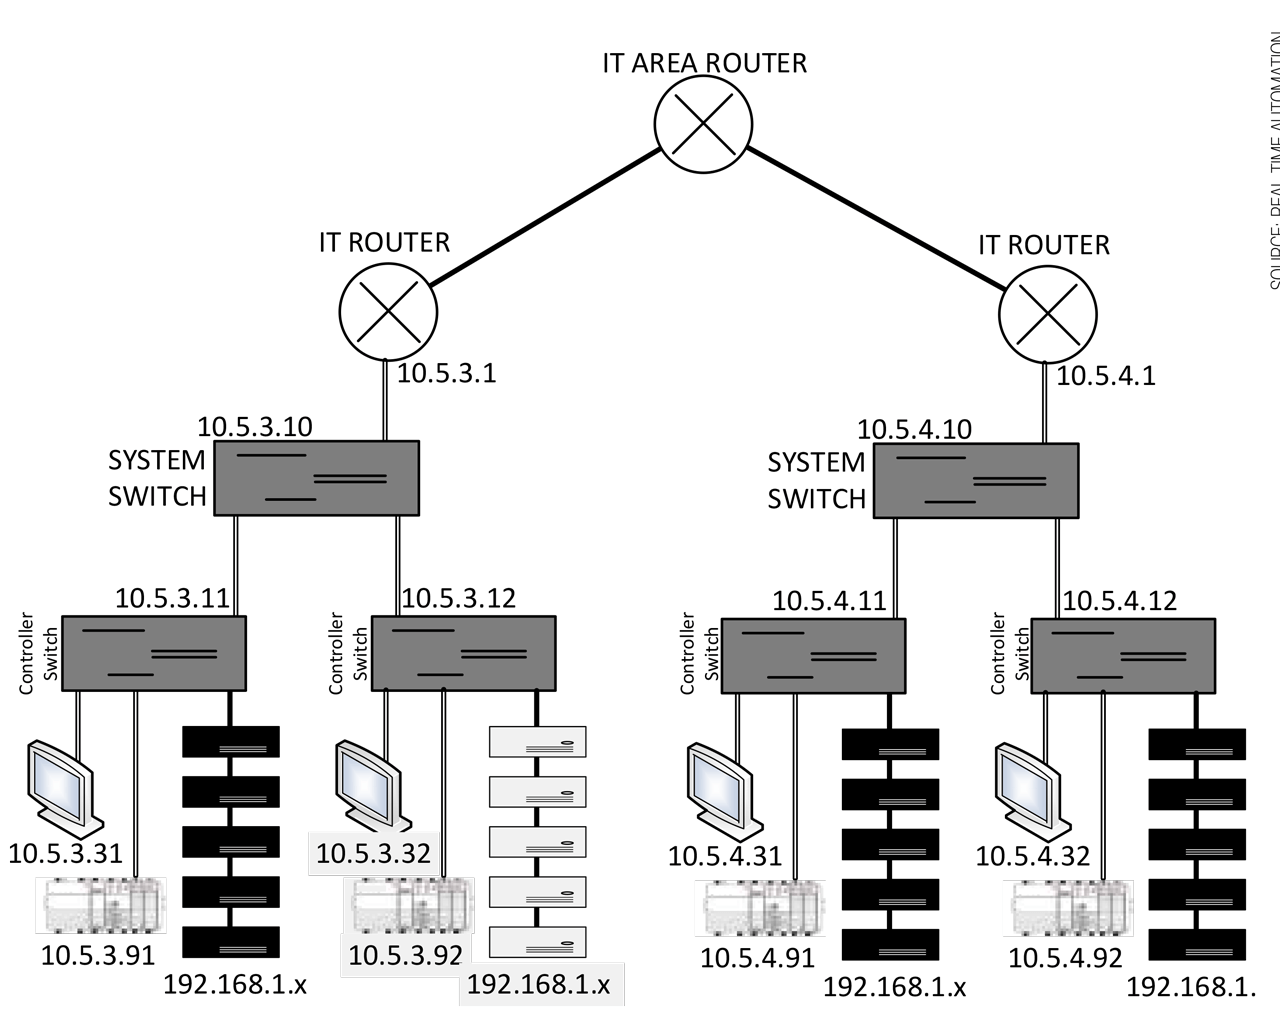 Figure 2 – Production zone with four EtherNet/IP control networks.